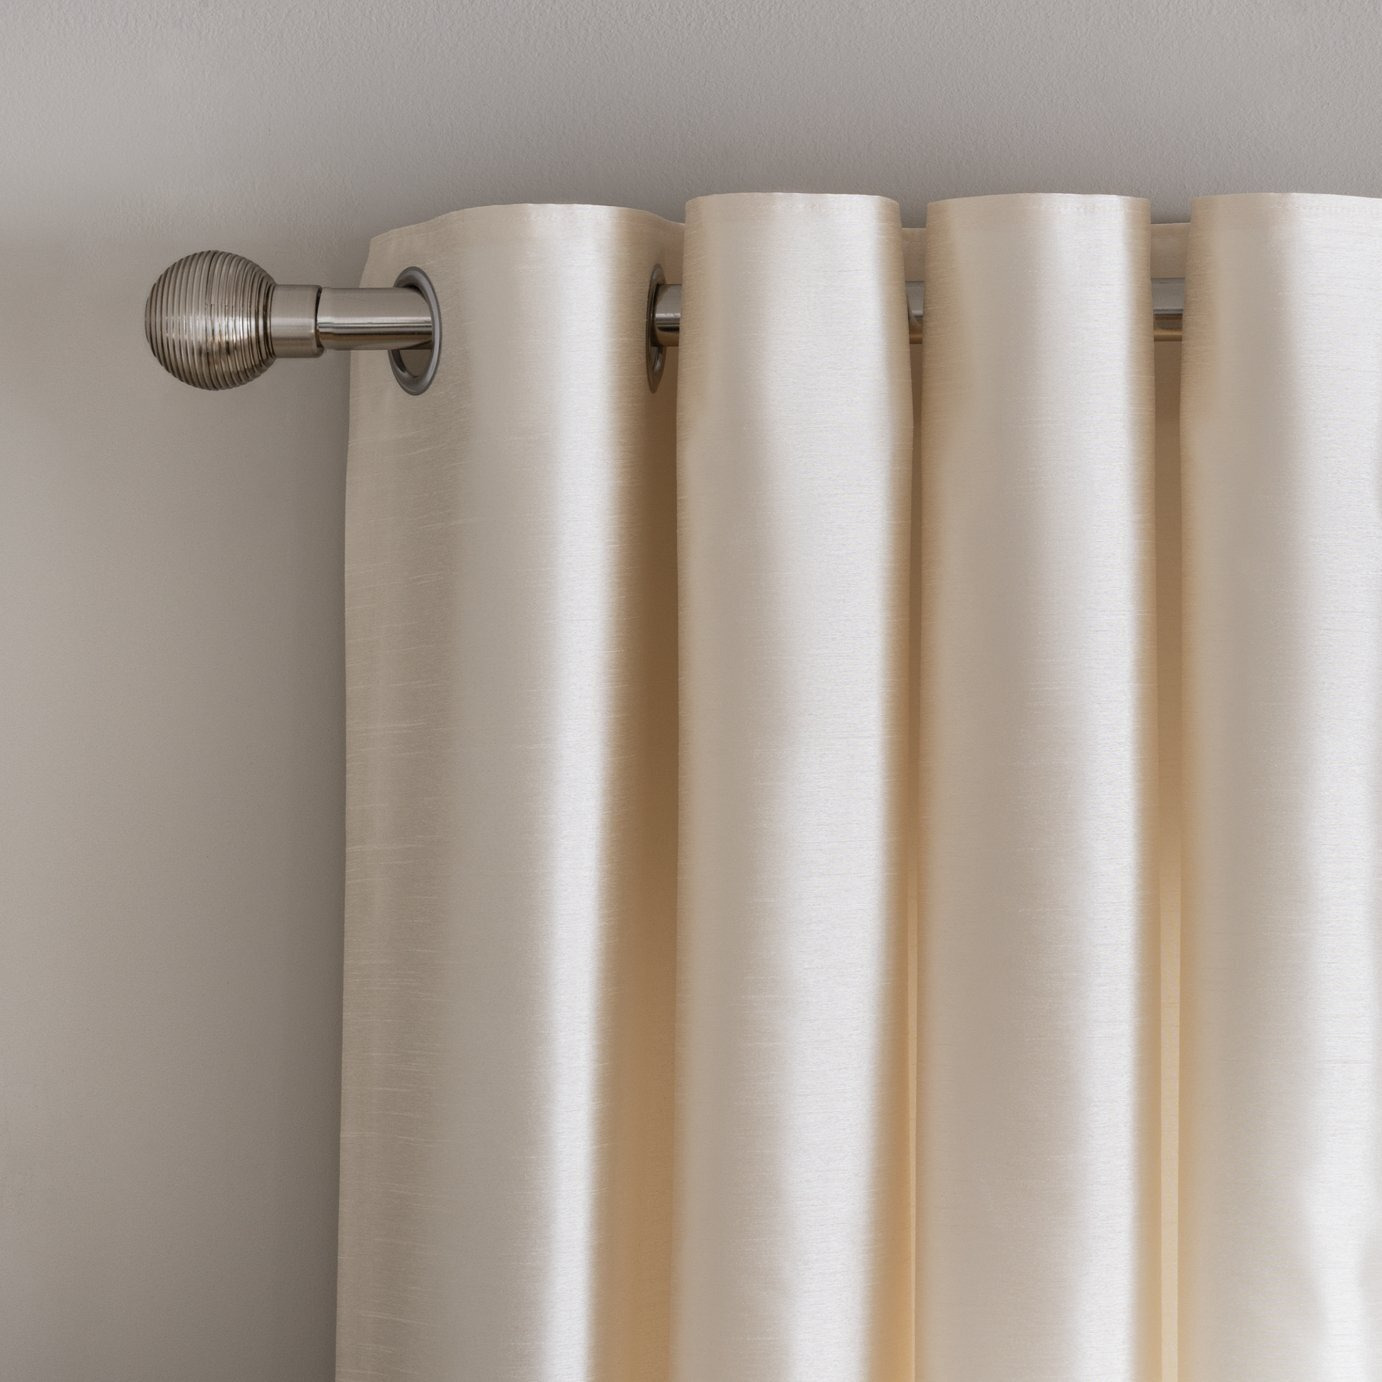 Habitat Faux Silk Fully Lined Eyelet Curtains - Champagne - image 1